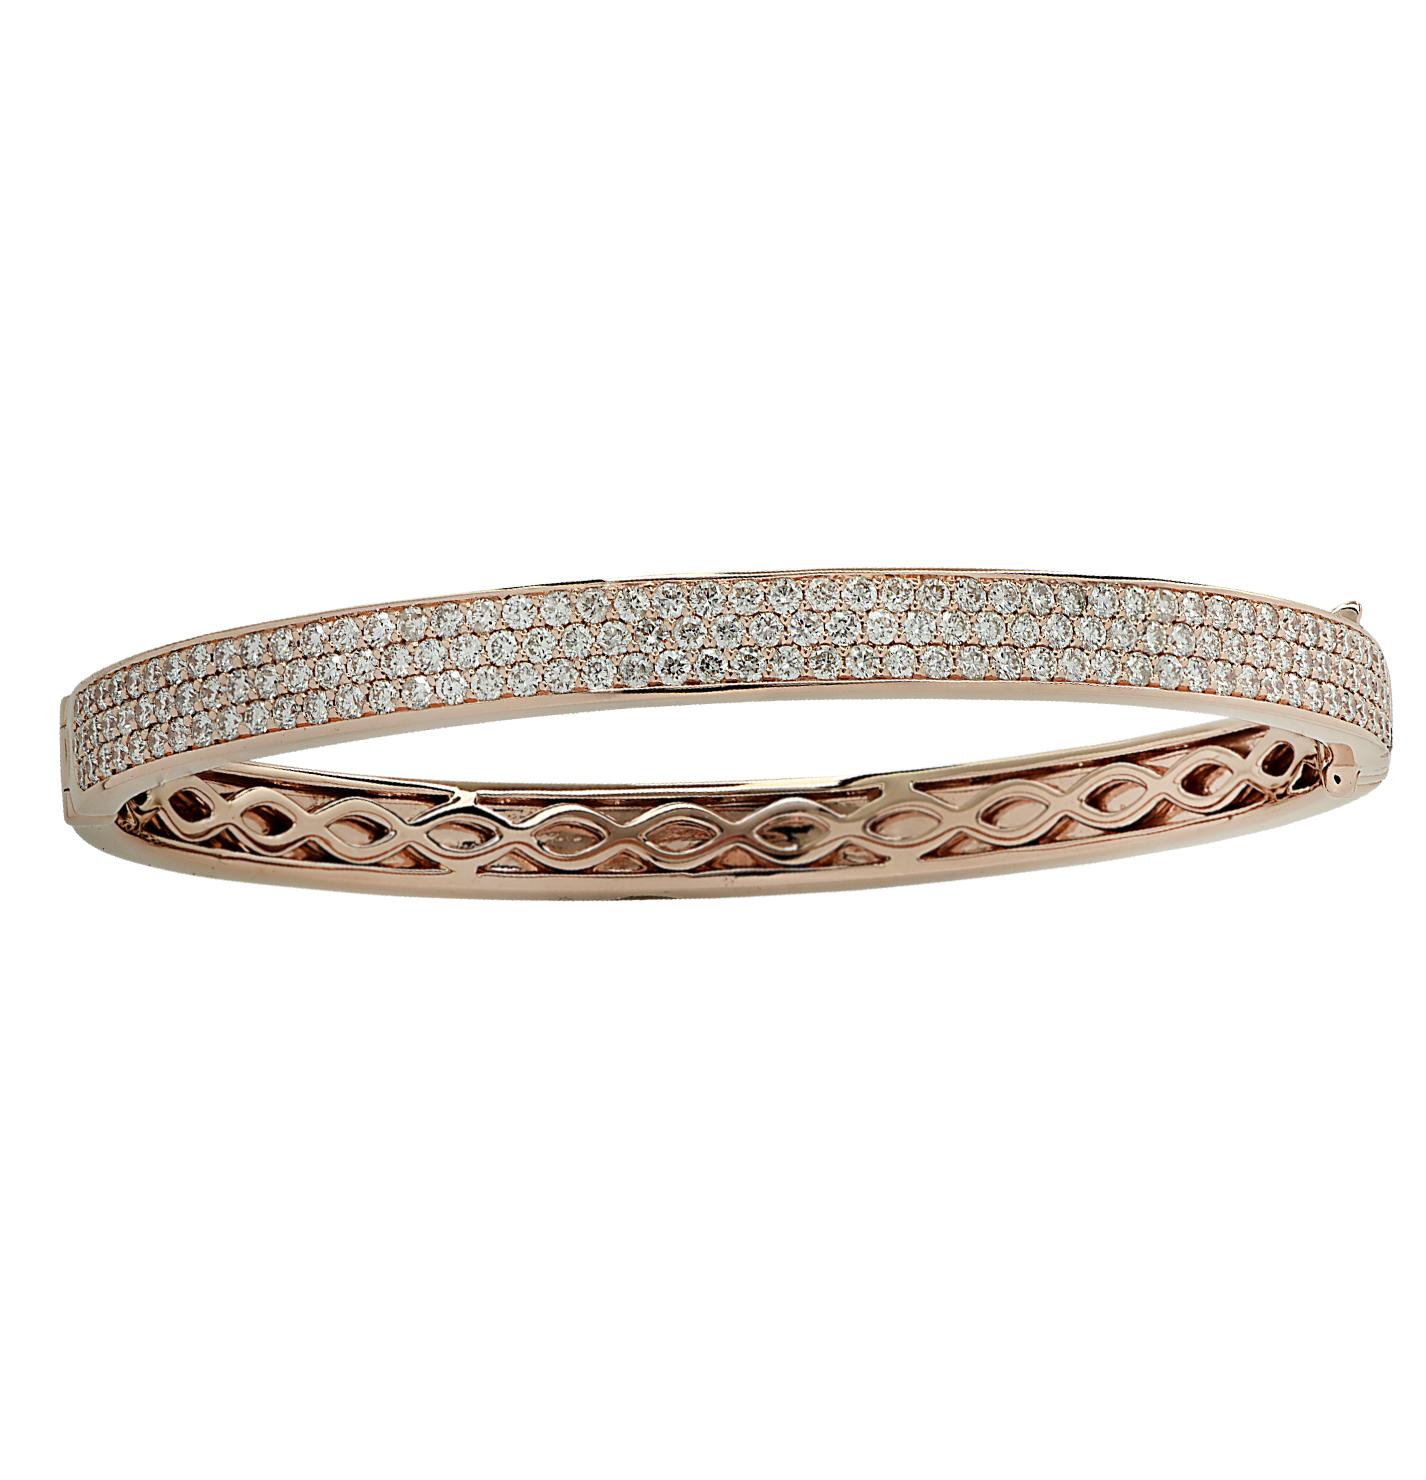 Stunning Vivid Diamonds Bangle Bracelet crafted in 18 karat Rose gold, featuring 302 round brilliant cut diamonds weighing 4.77 carats total, F color, VS-SI clarity. This spectacular bangle is pave set with three rows of diamonds, which dazzle with